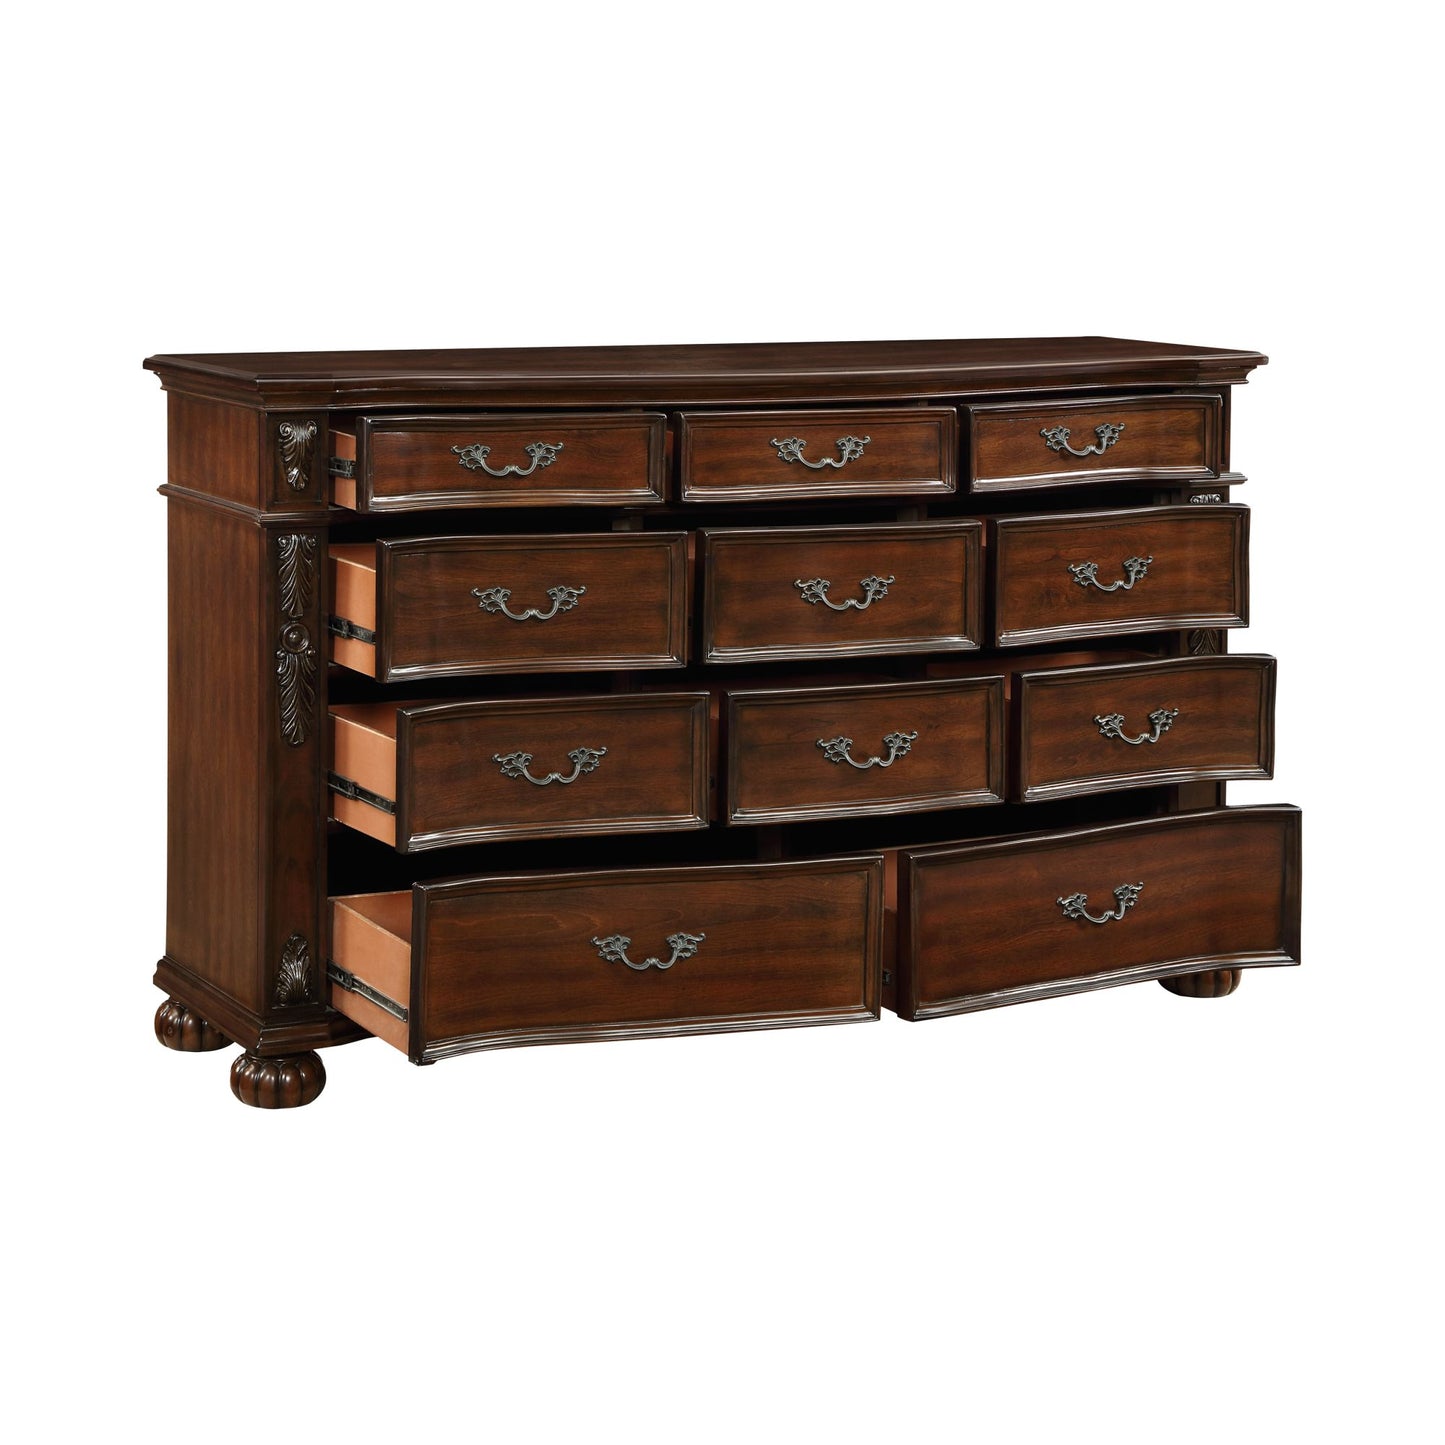 Classic Traditional 1pc Dresser of 11 Drawers Cherry Finish Formal Bedroom Furniture Carving Wood Design